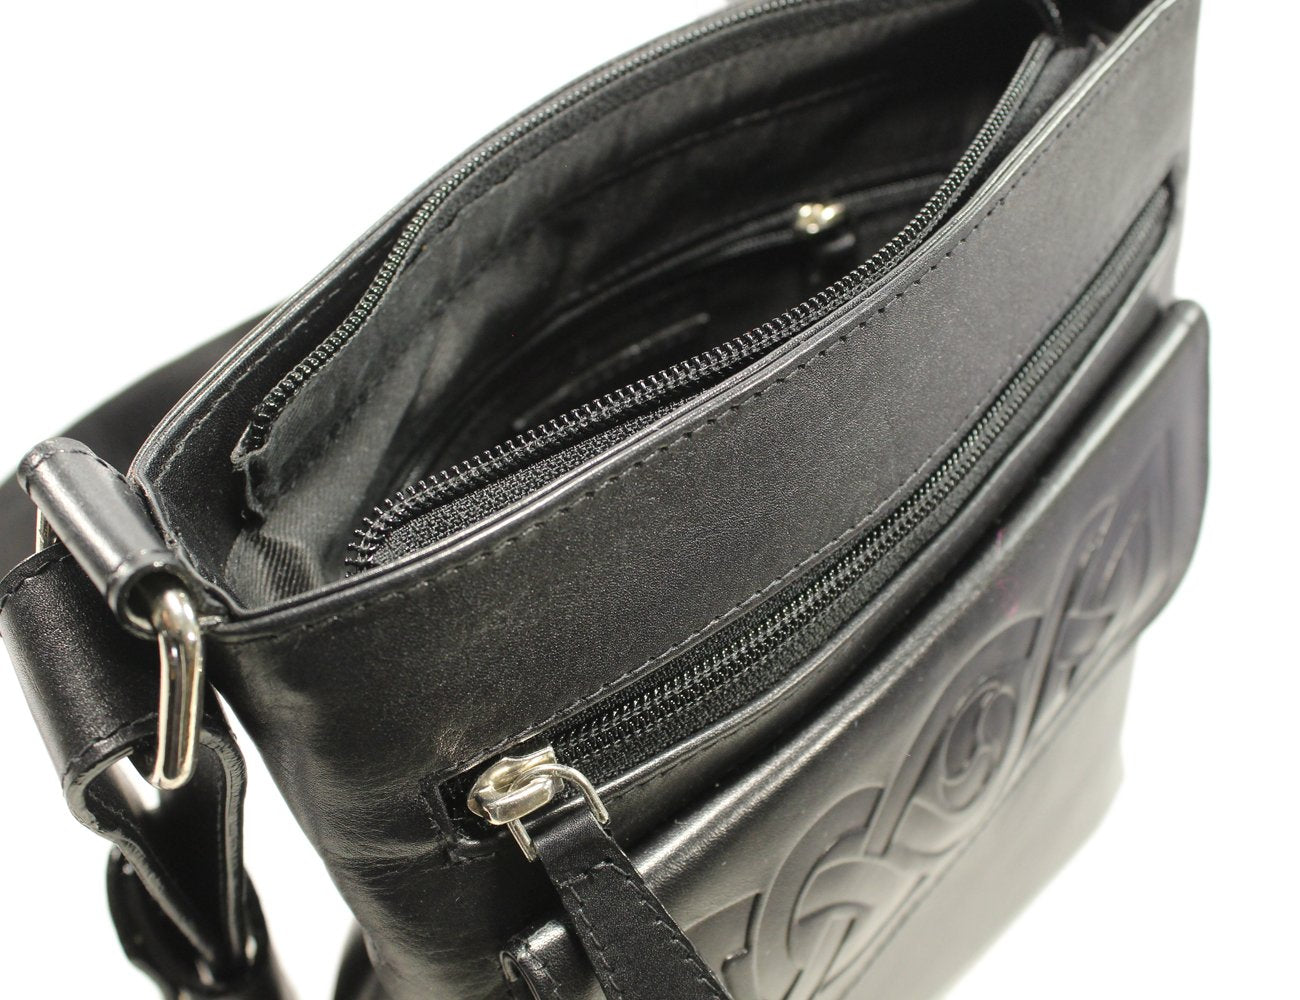 Lee River "Mary" Leather Cross Body Bag